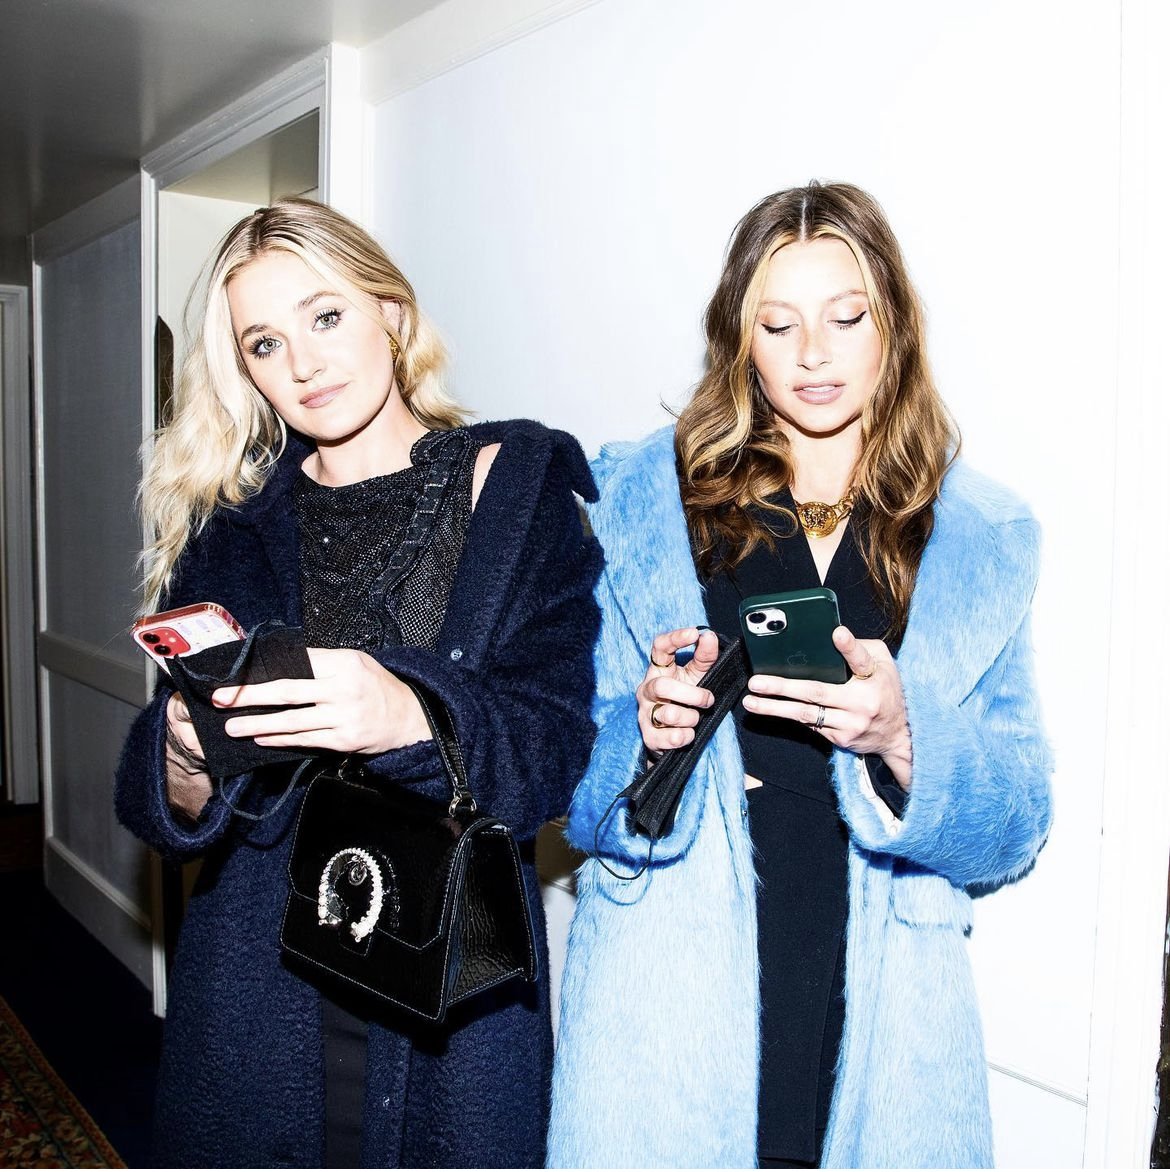 The Cut Magazine Digital Feature: Aly and AJ